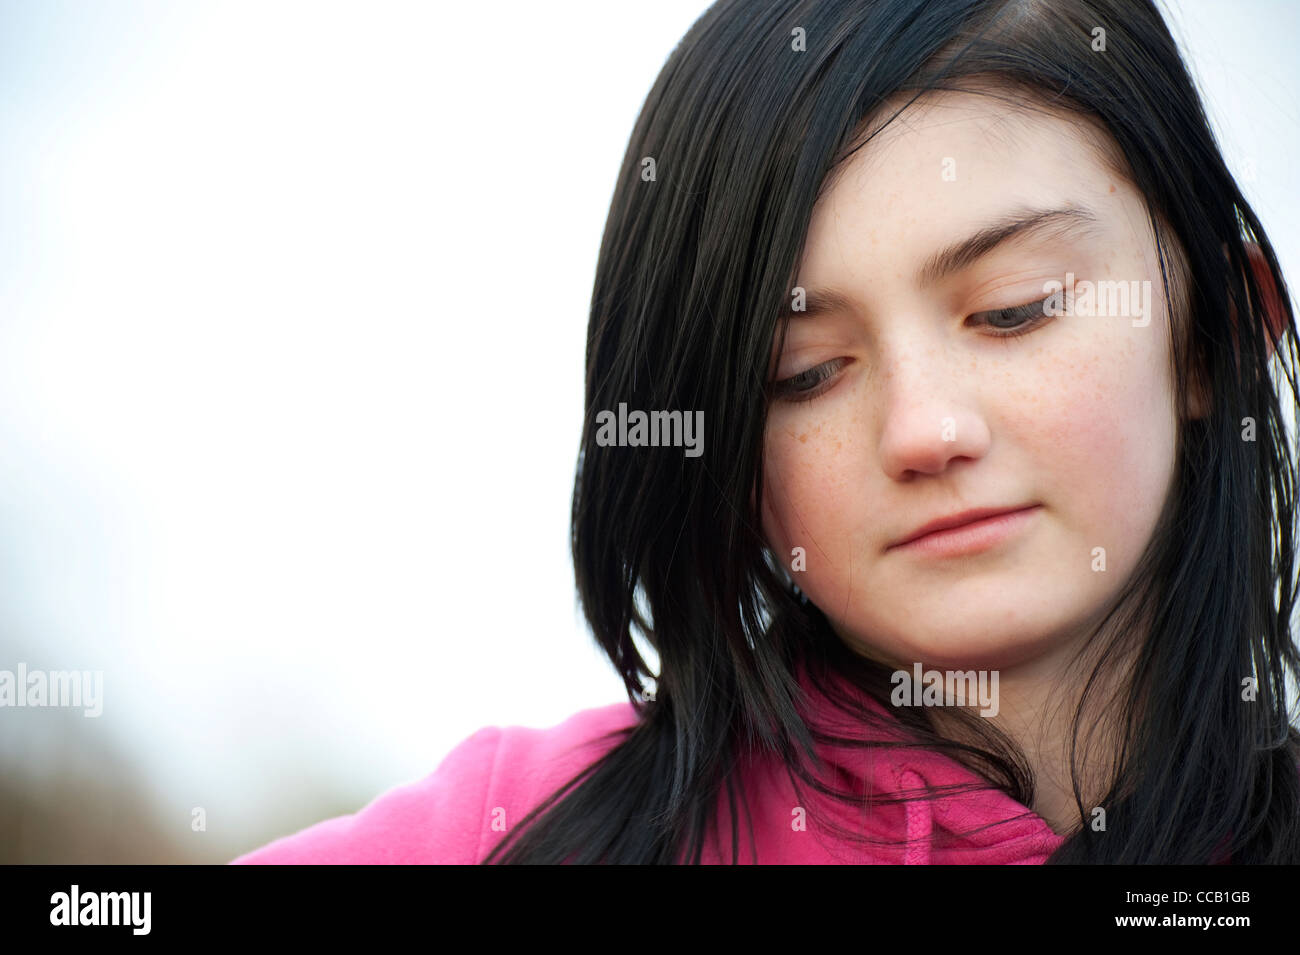 depressed young female girl Stock Photo